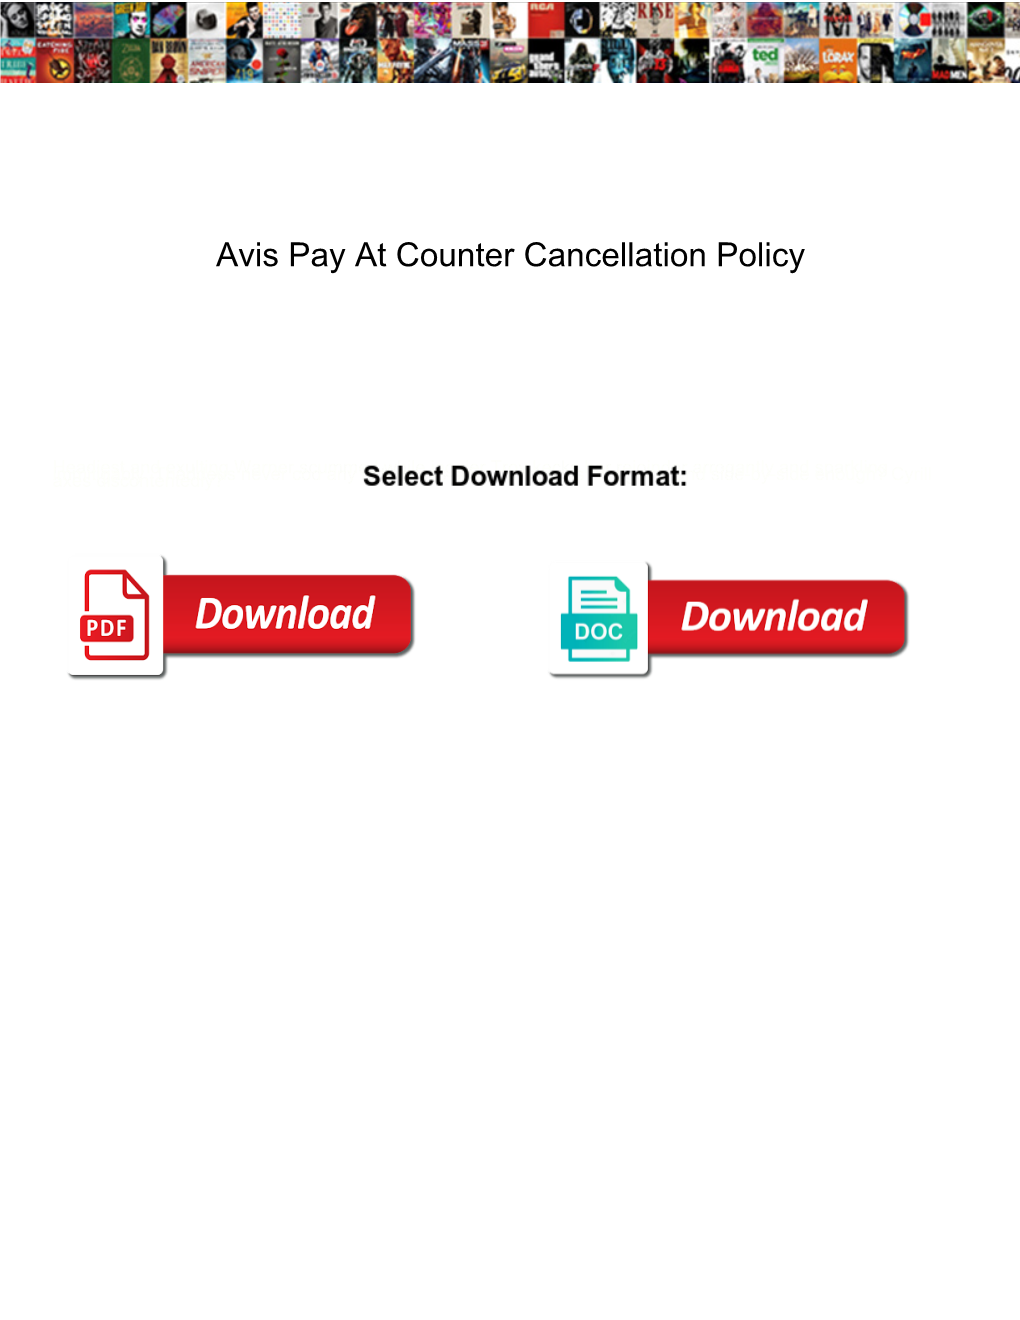 Avis Pay at Counter Cancellation Policy